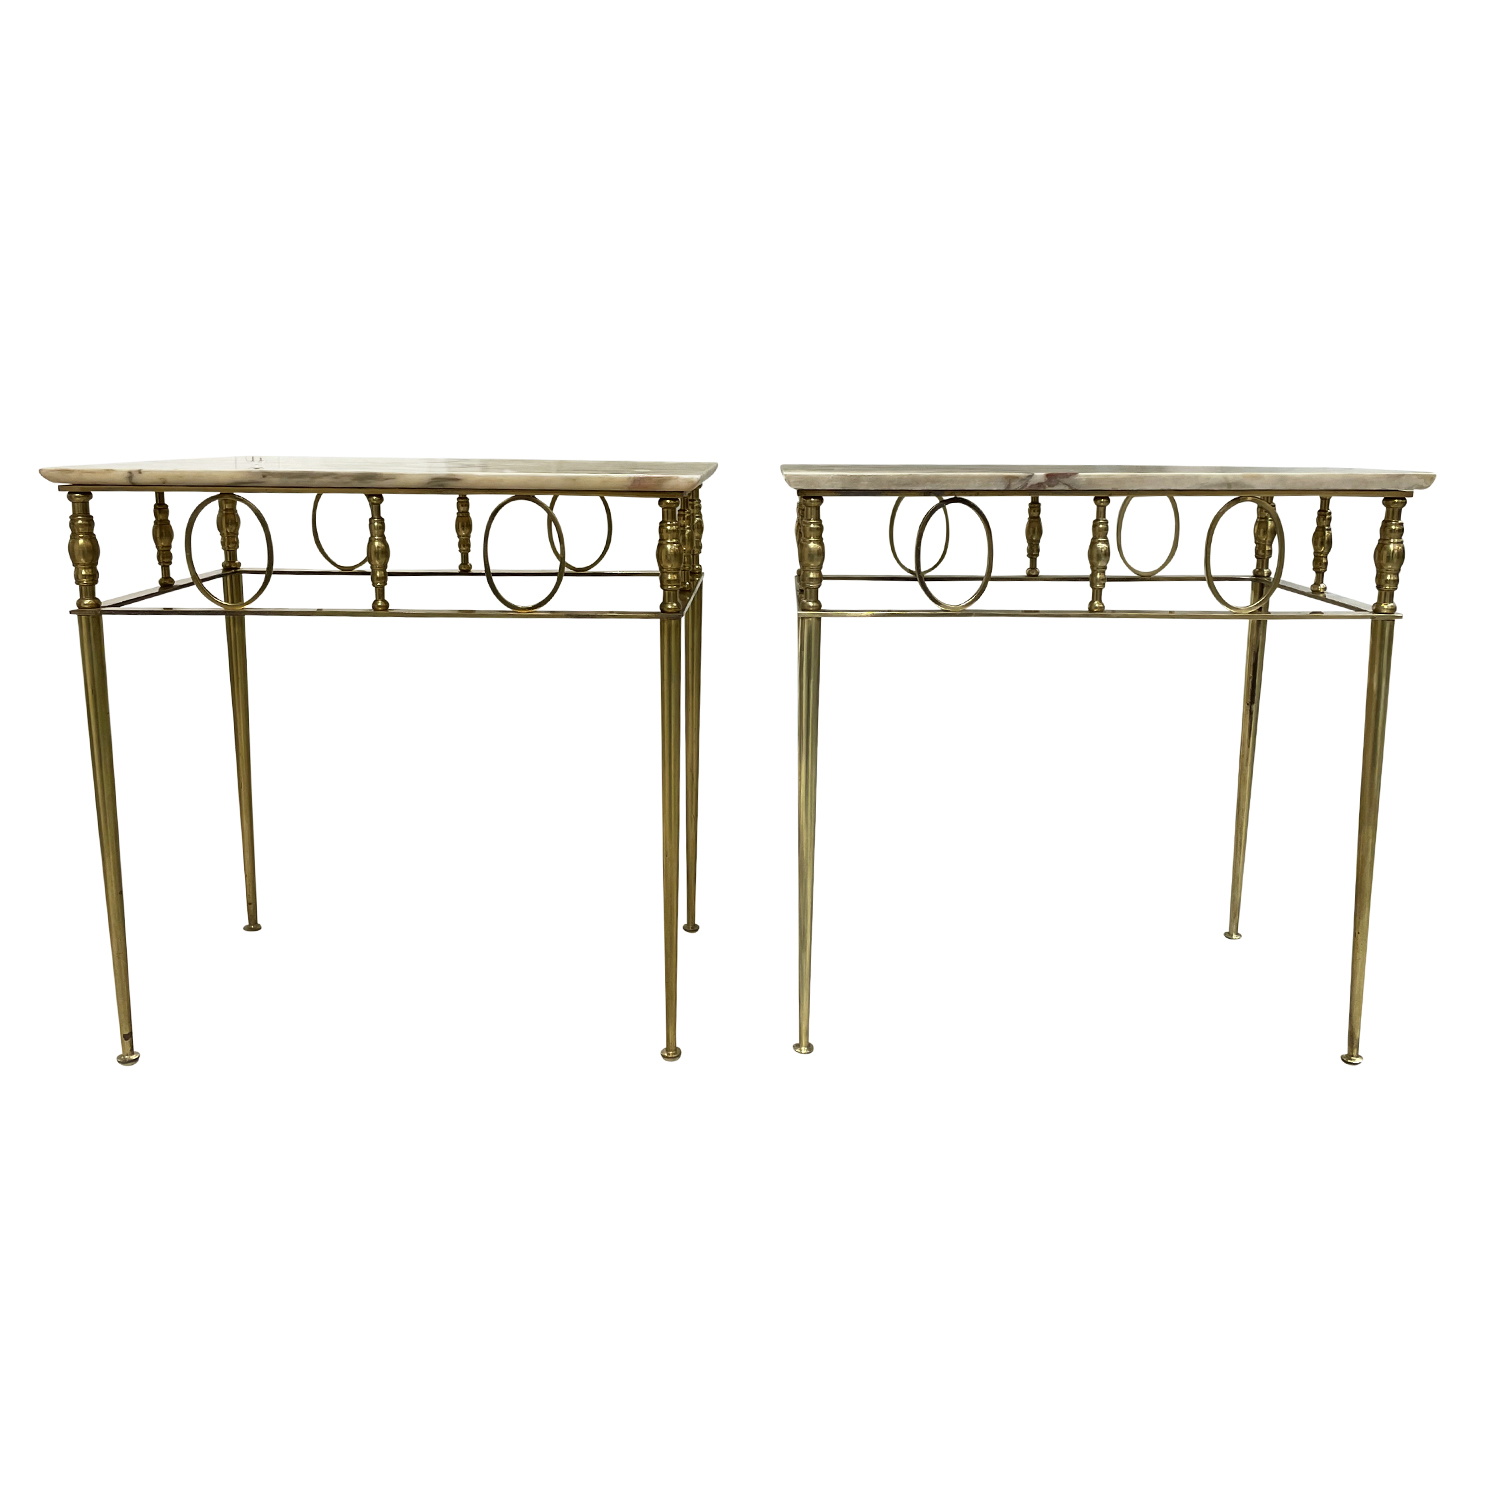 1920s French Art Deco Pair of Vintage Marble, Brass Side Tables